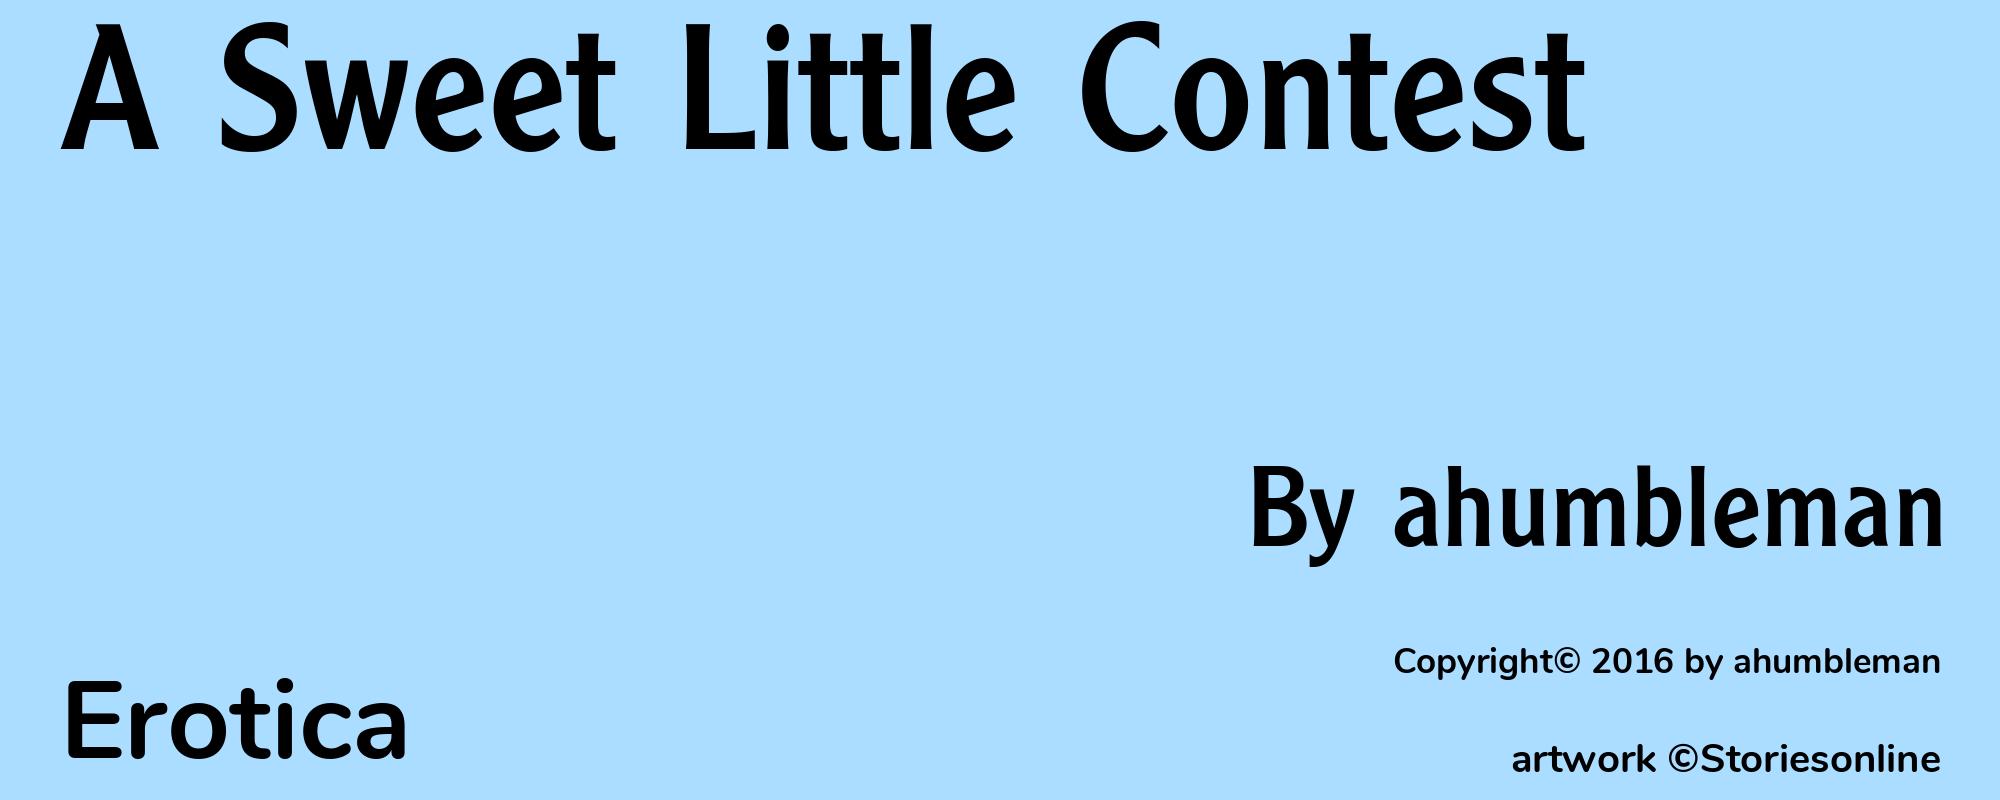 A Sweet Little Contest - Cover